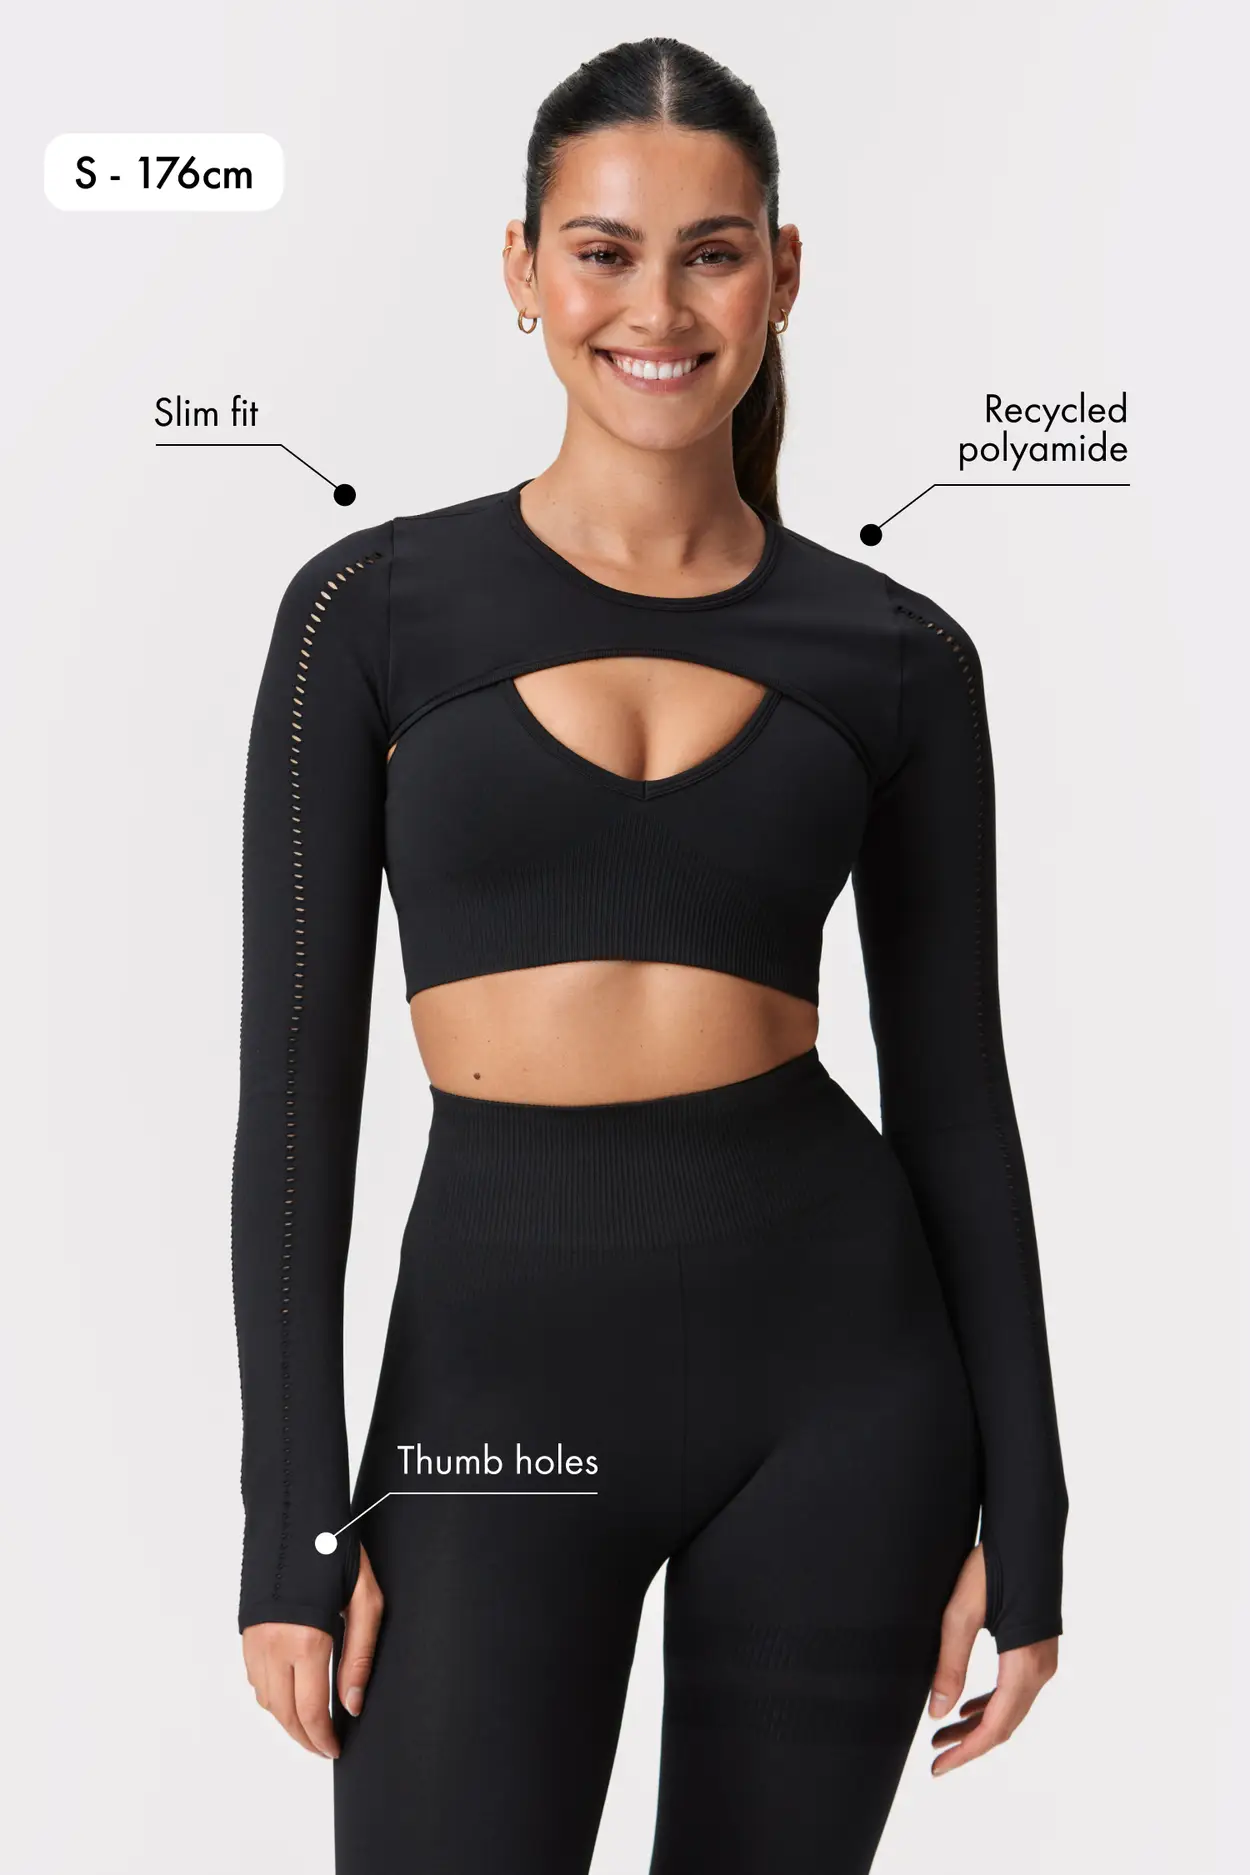 Thumb Holes Yoga Crop Top, Workout Compression Athletic Shirts